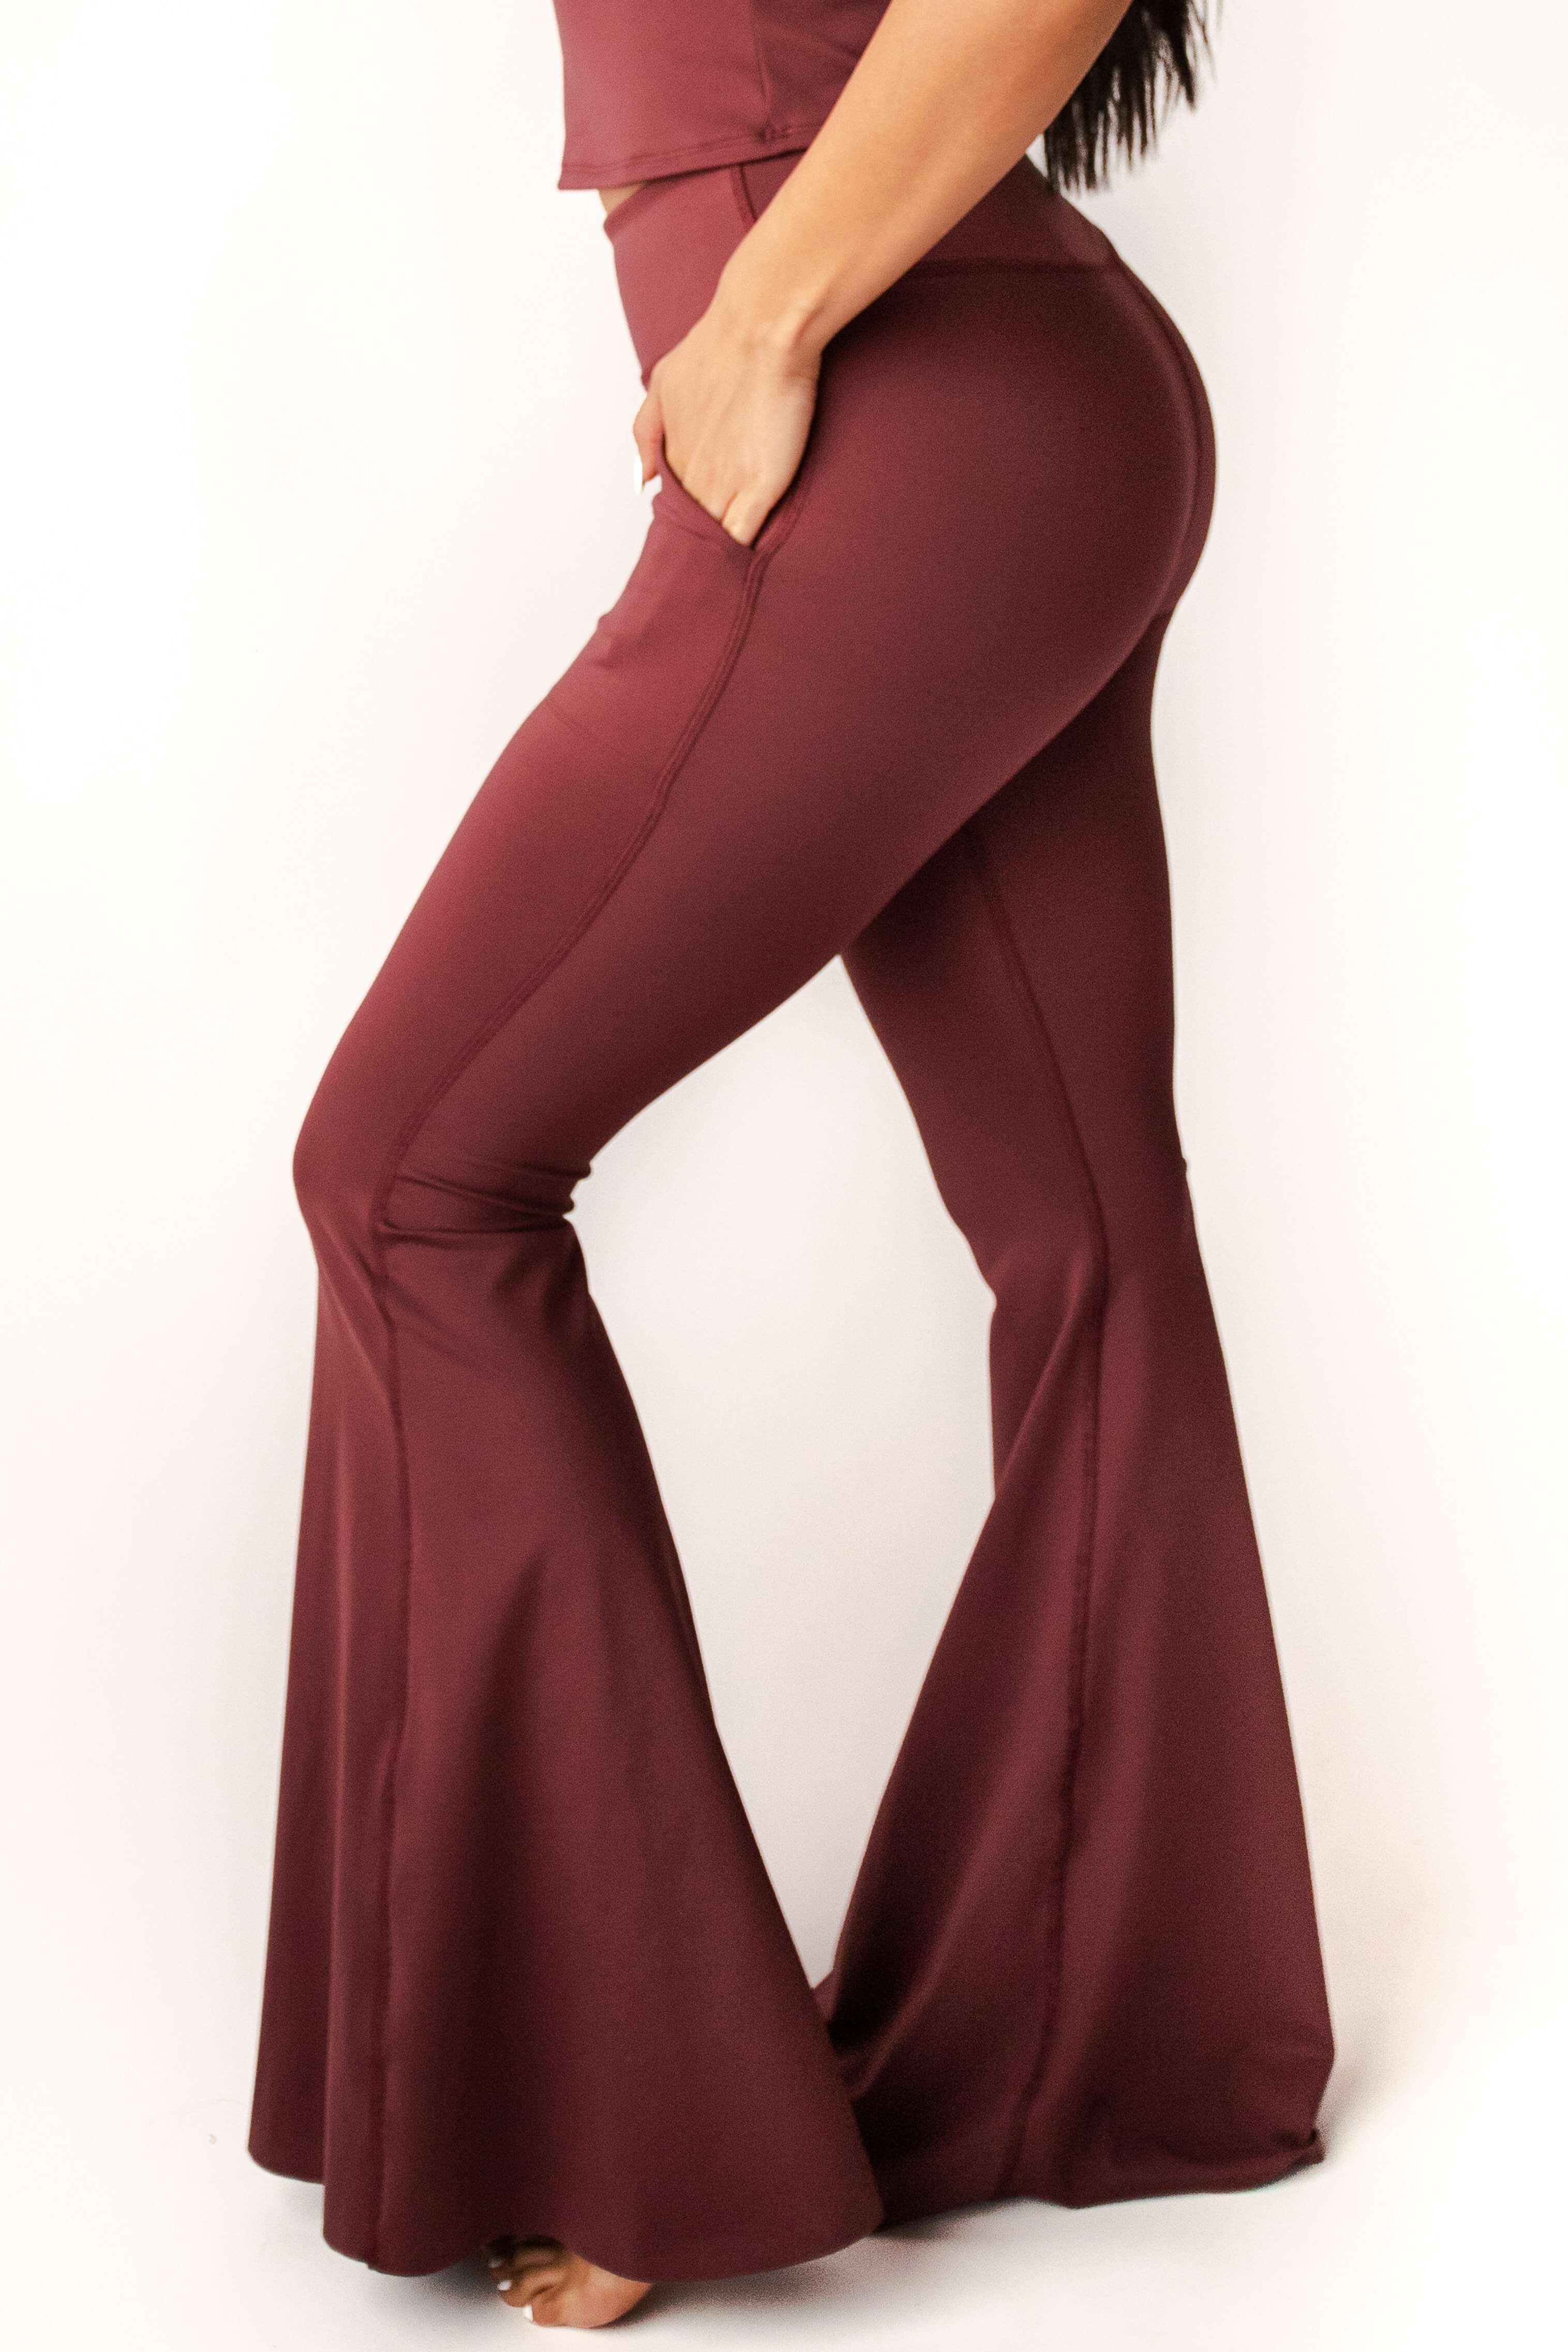 IRANA - Old Money Office And Casual Pant ( Maroon ) - Lady Boss